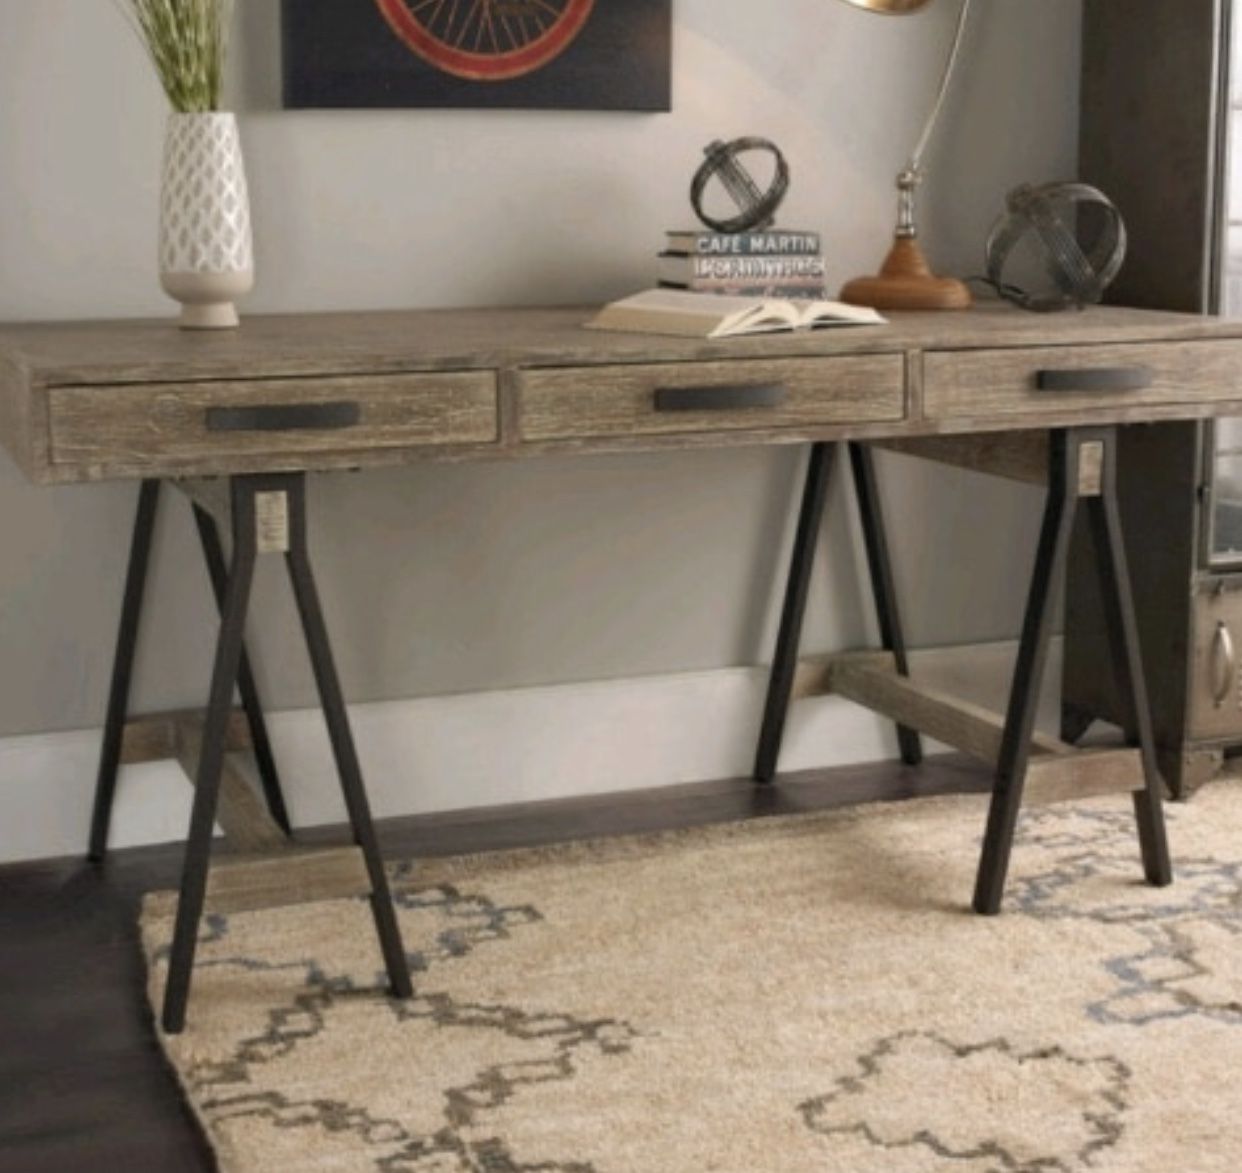 DESK $235 BRAND NEW brown rustic wooden table/desk with black metal base